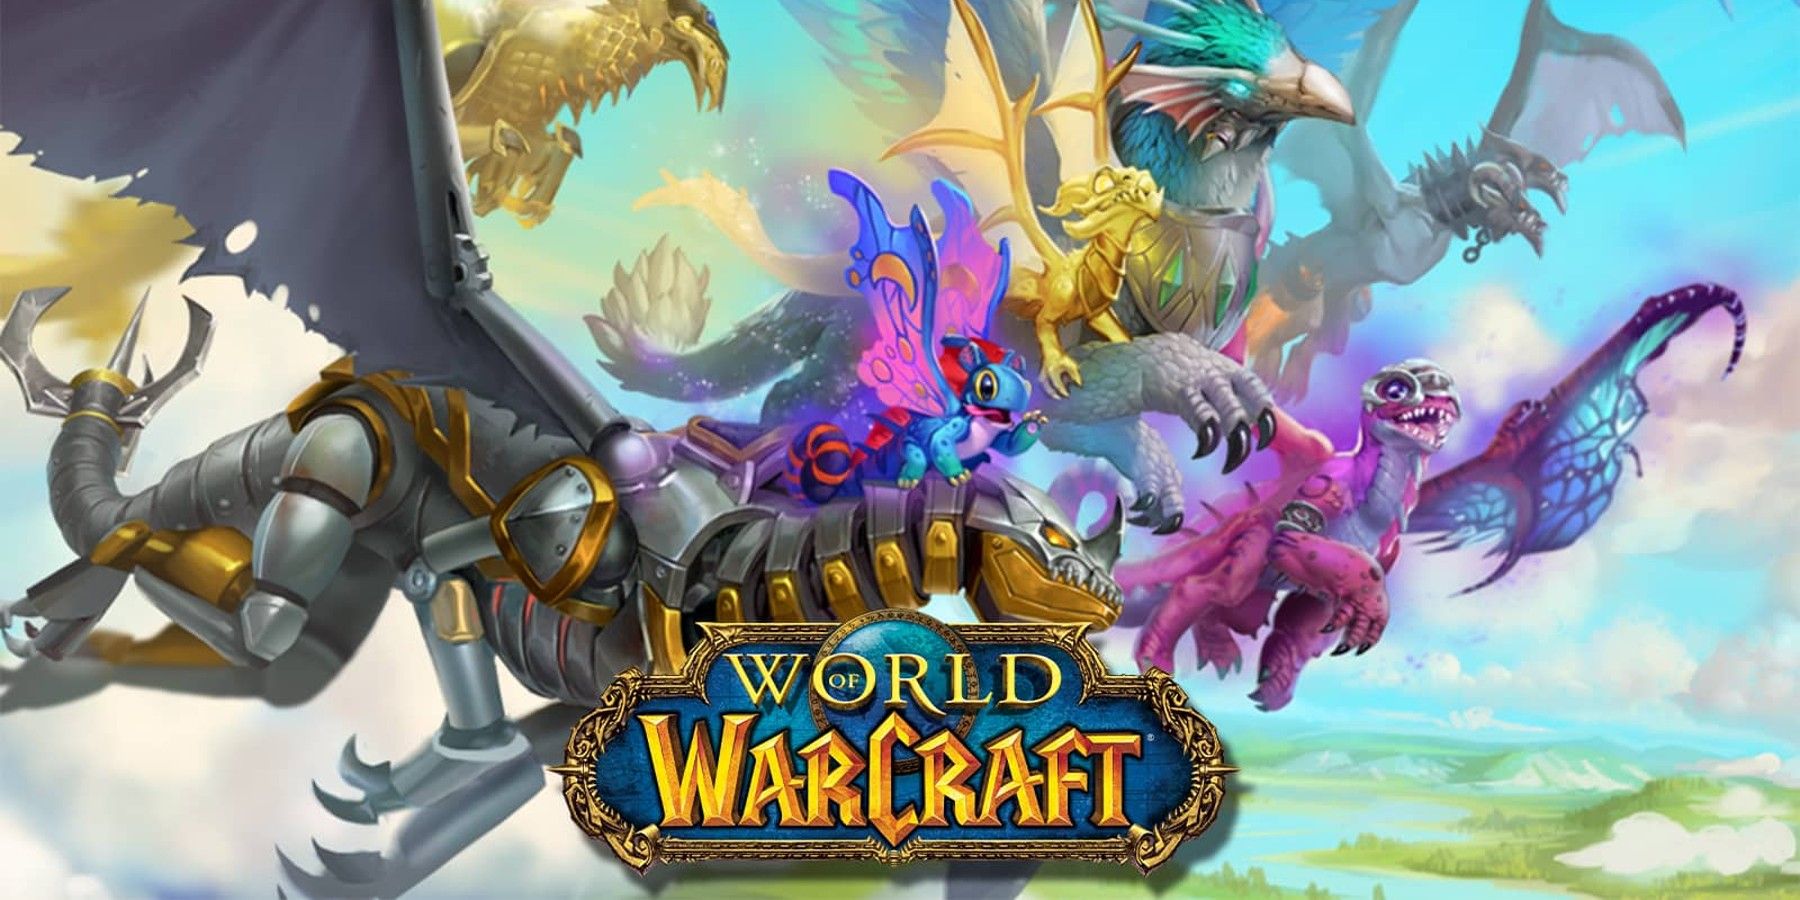 How World of Warcraft's Expansions Changed the Game